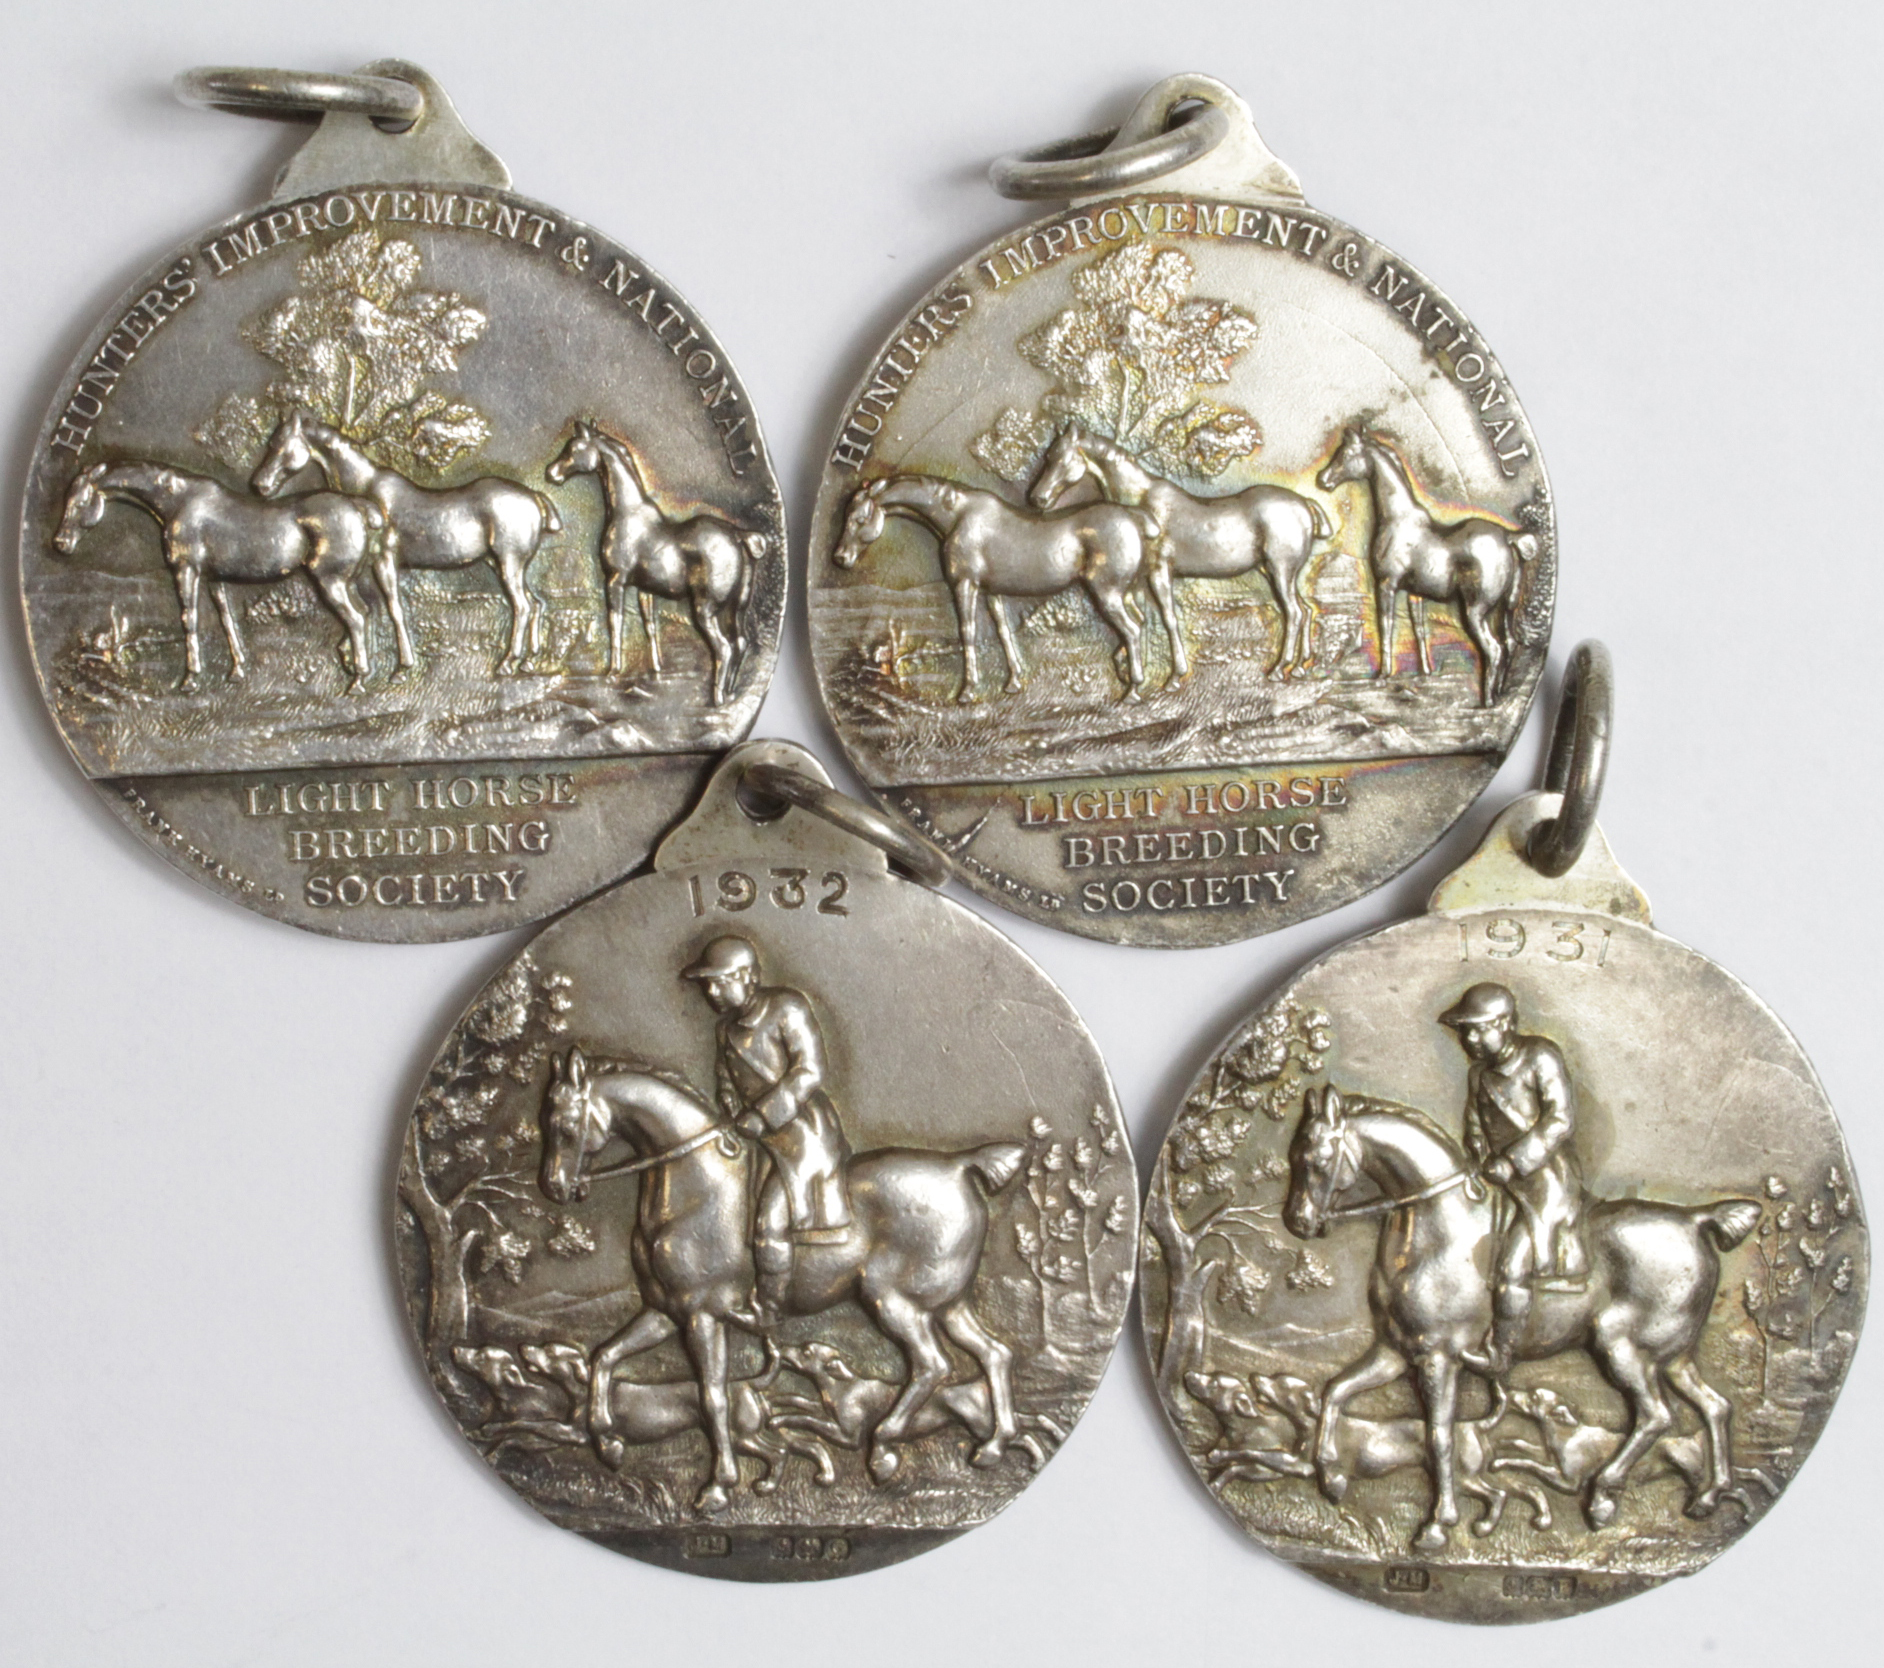 Hunters Improvement & National Light Horse Breeding Society 4x hallmarked silver prize medals